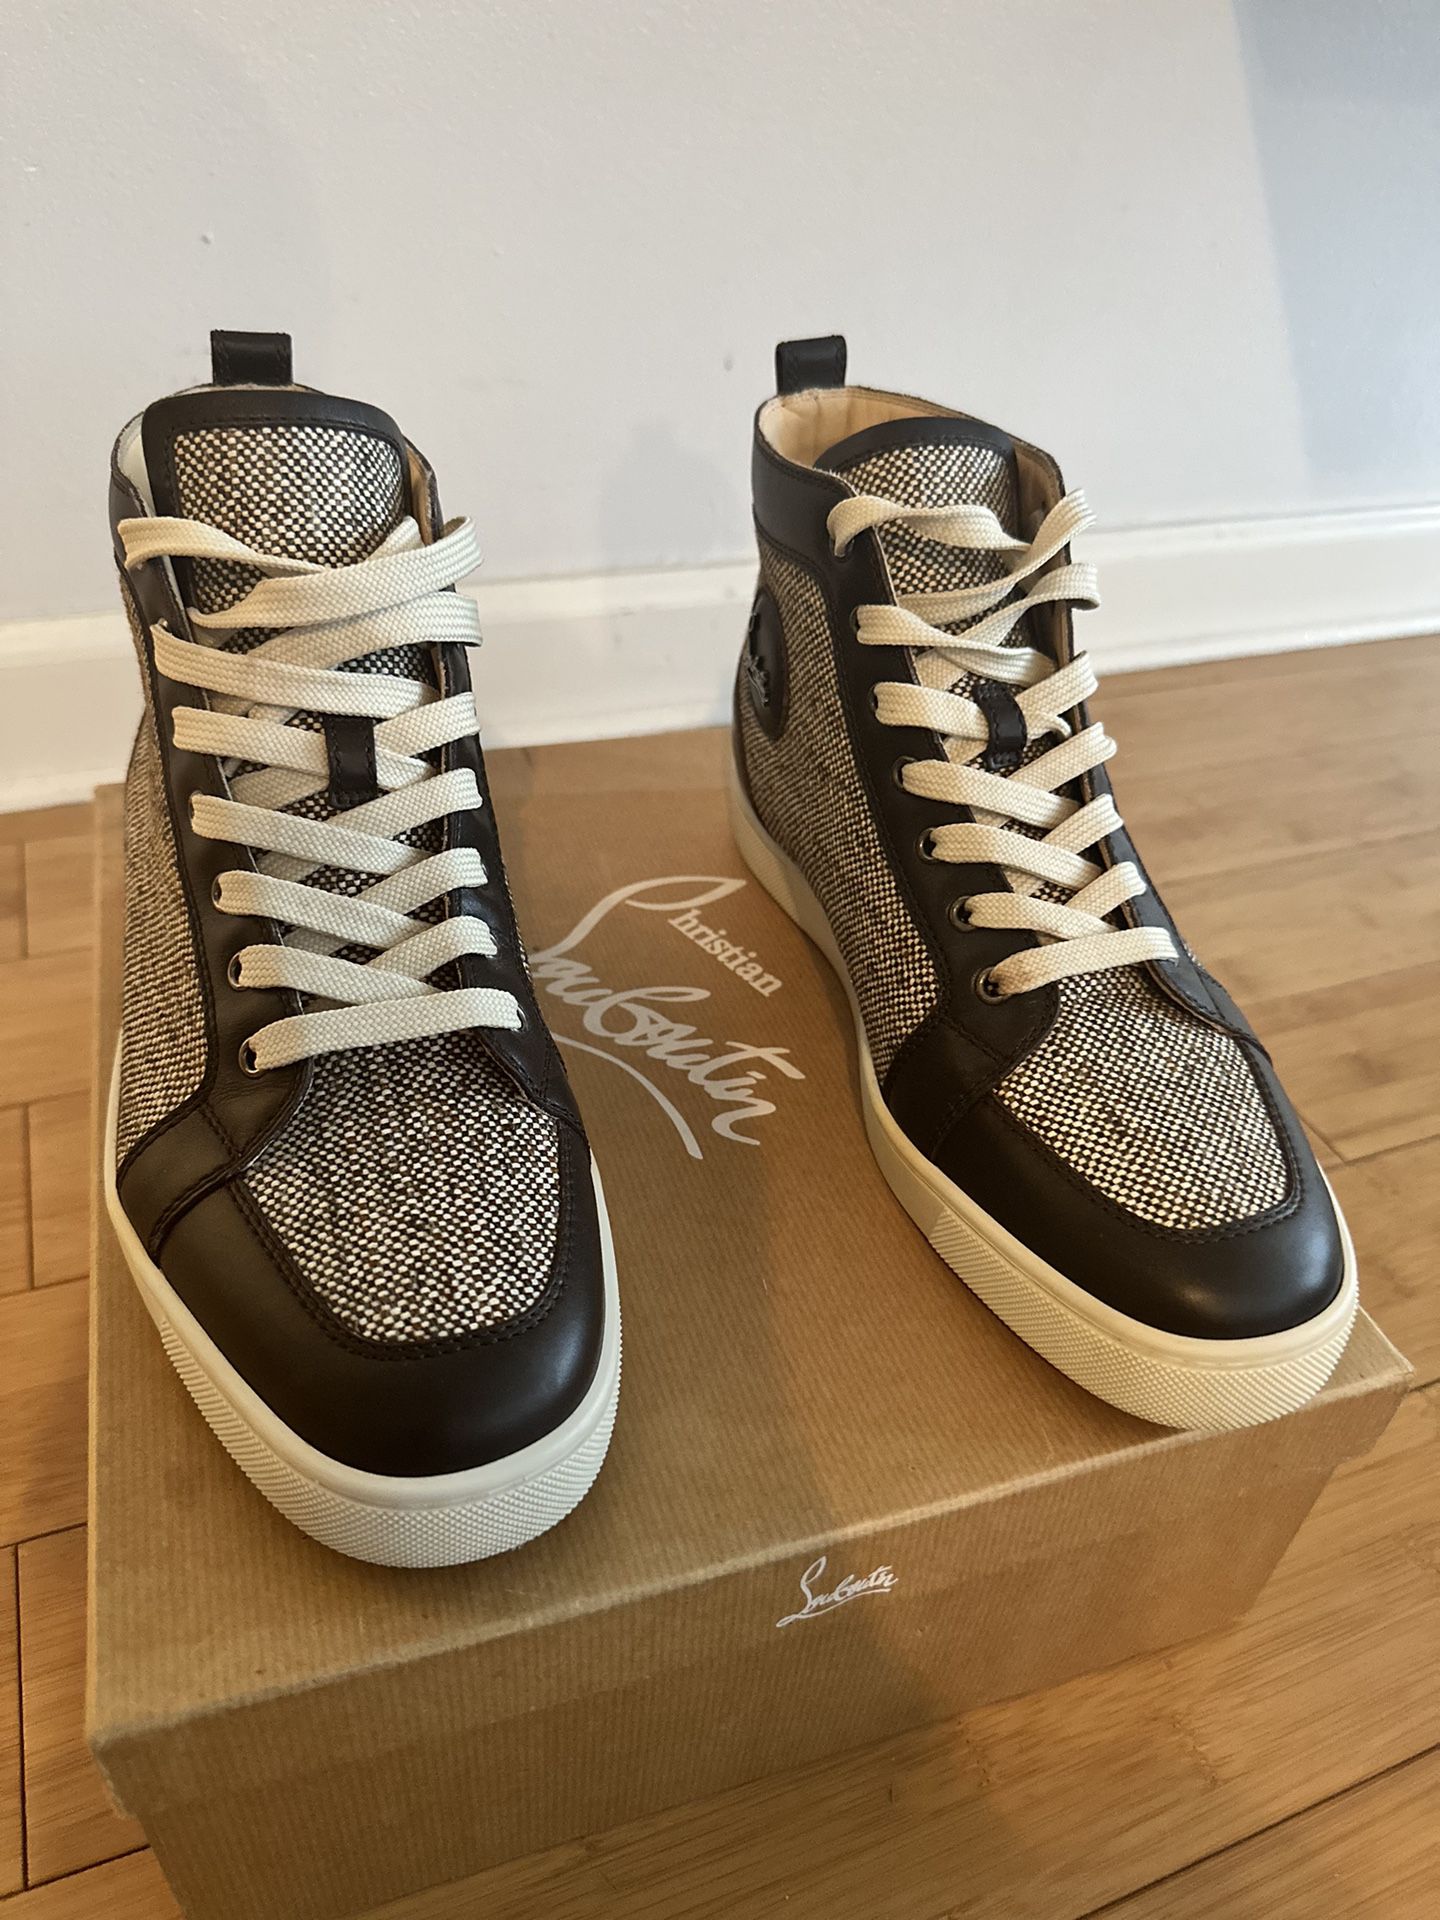 Christian Louboutin, Shoes, Christian Louboutin Sneaker For Sale